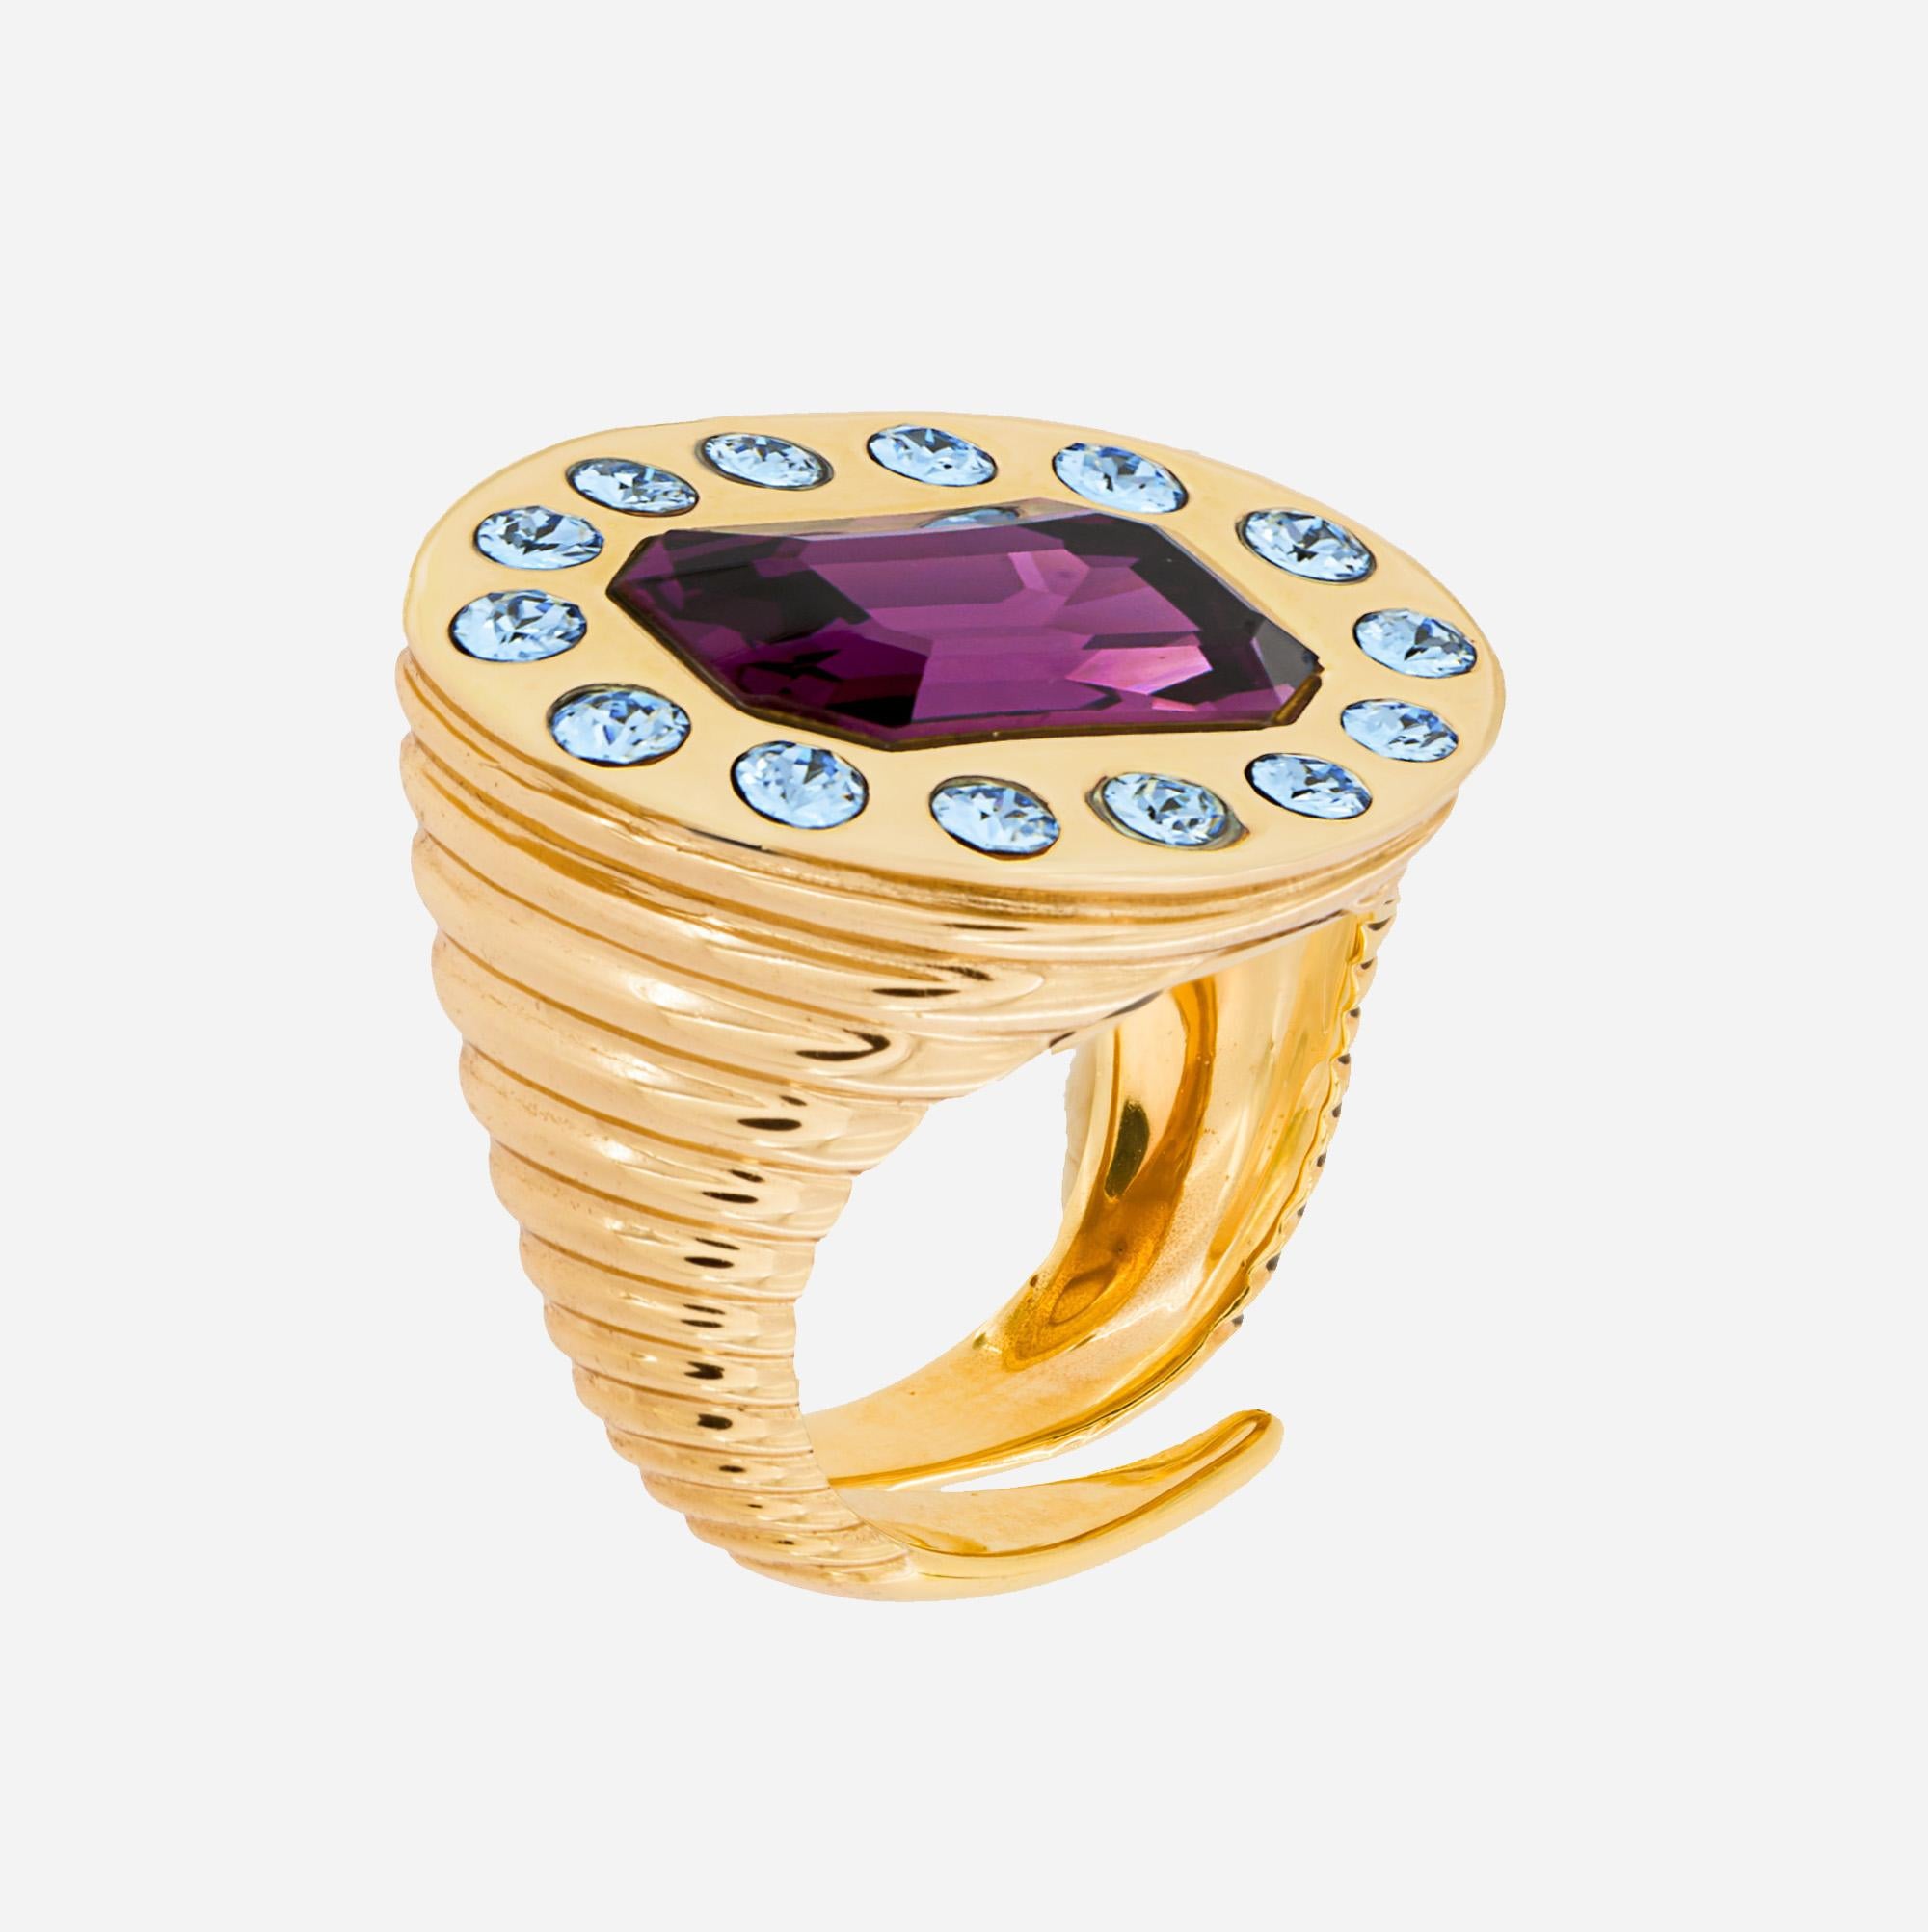 This adjustable chevalier ring is defined by an enveloping design and it is inspired by the ancient jewels from Victorian Age. It is finished by the brand’s iconic knurled motif, it is decorated on the top with small aquamarine crystals around a big